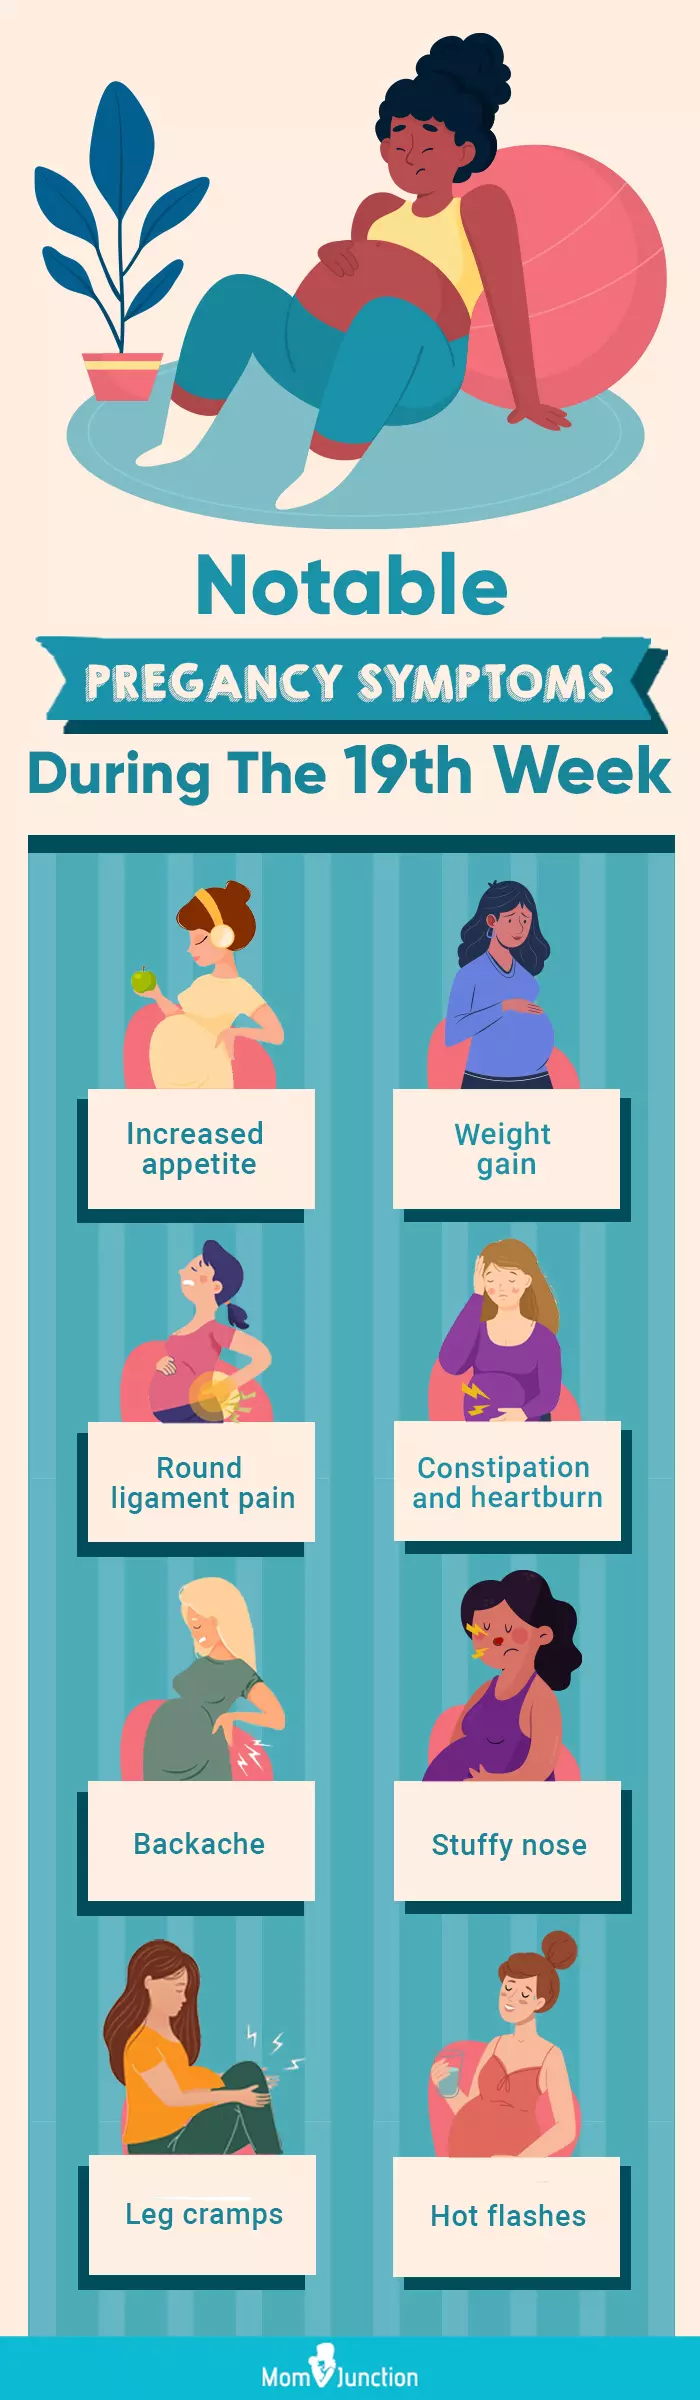 notable pregnancy symptoms during the 19th week (infographic)